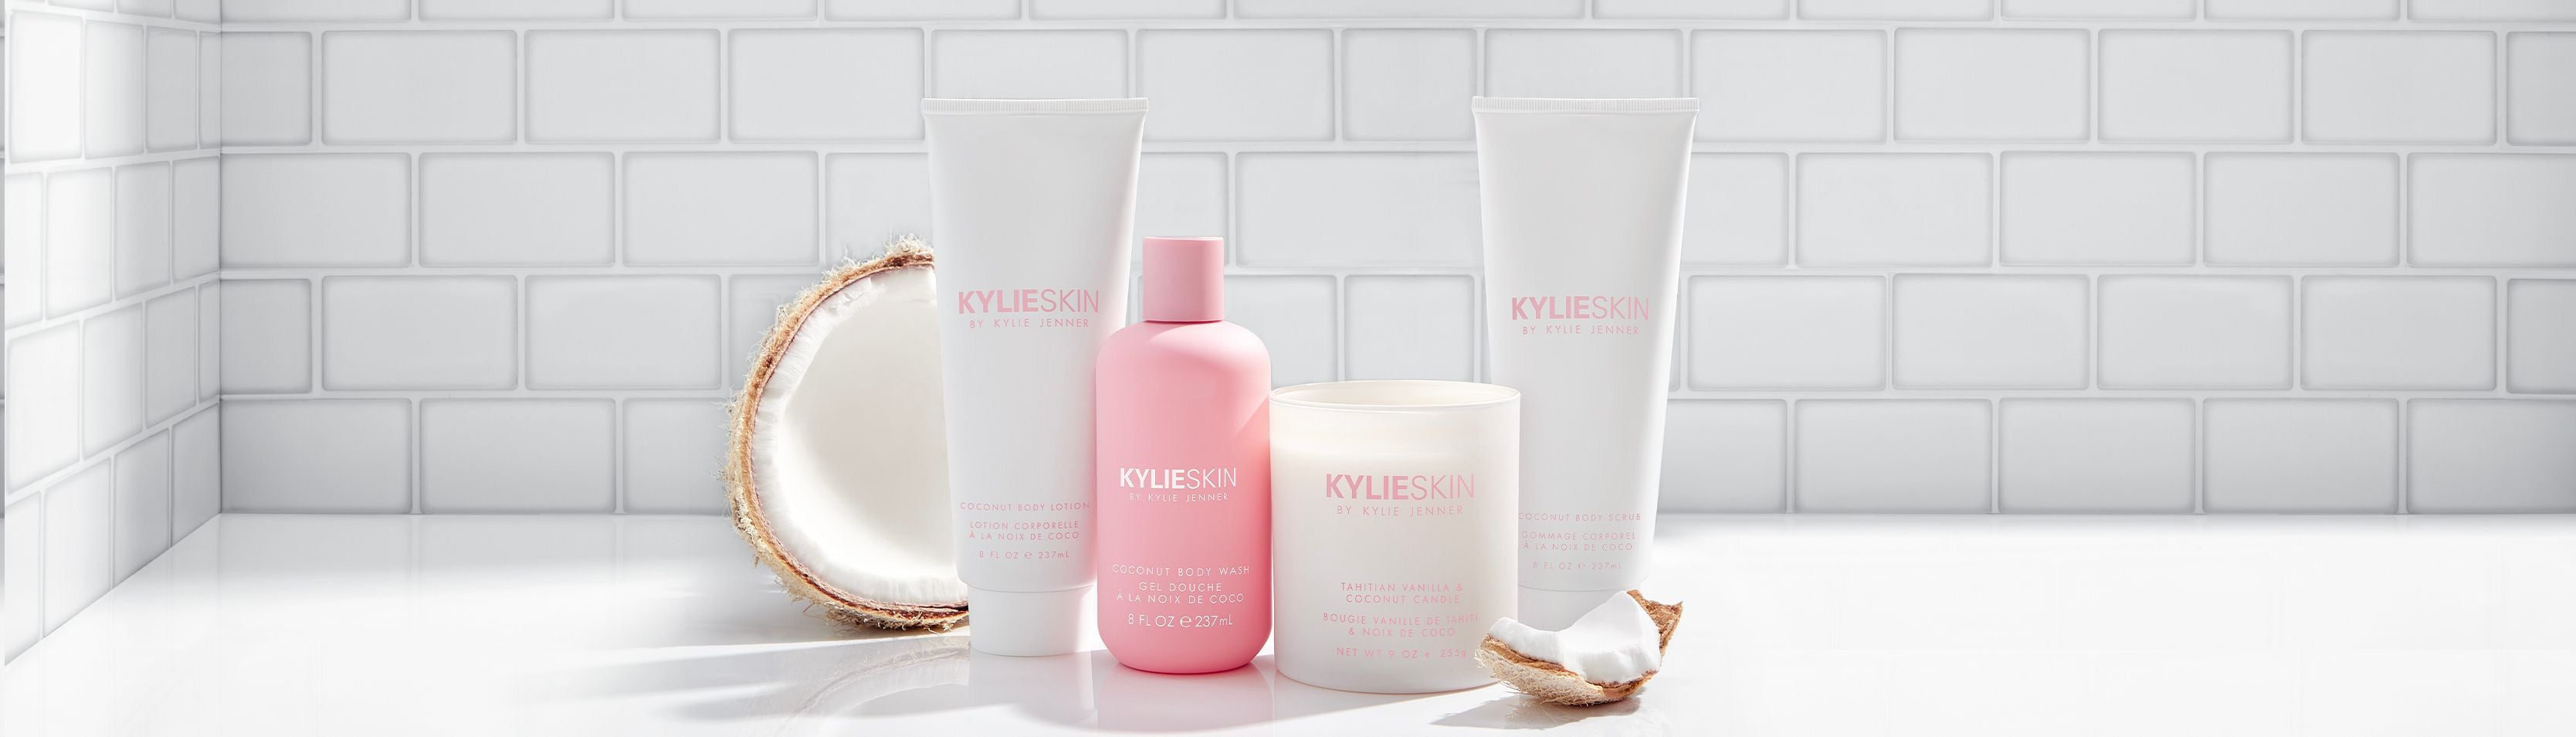 Kylie Skin - Collection - Coconut Body